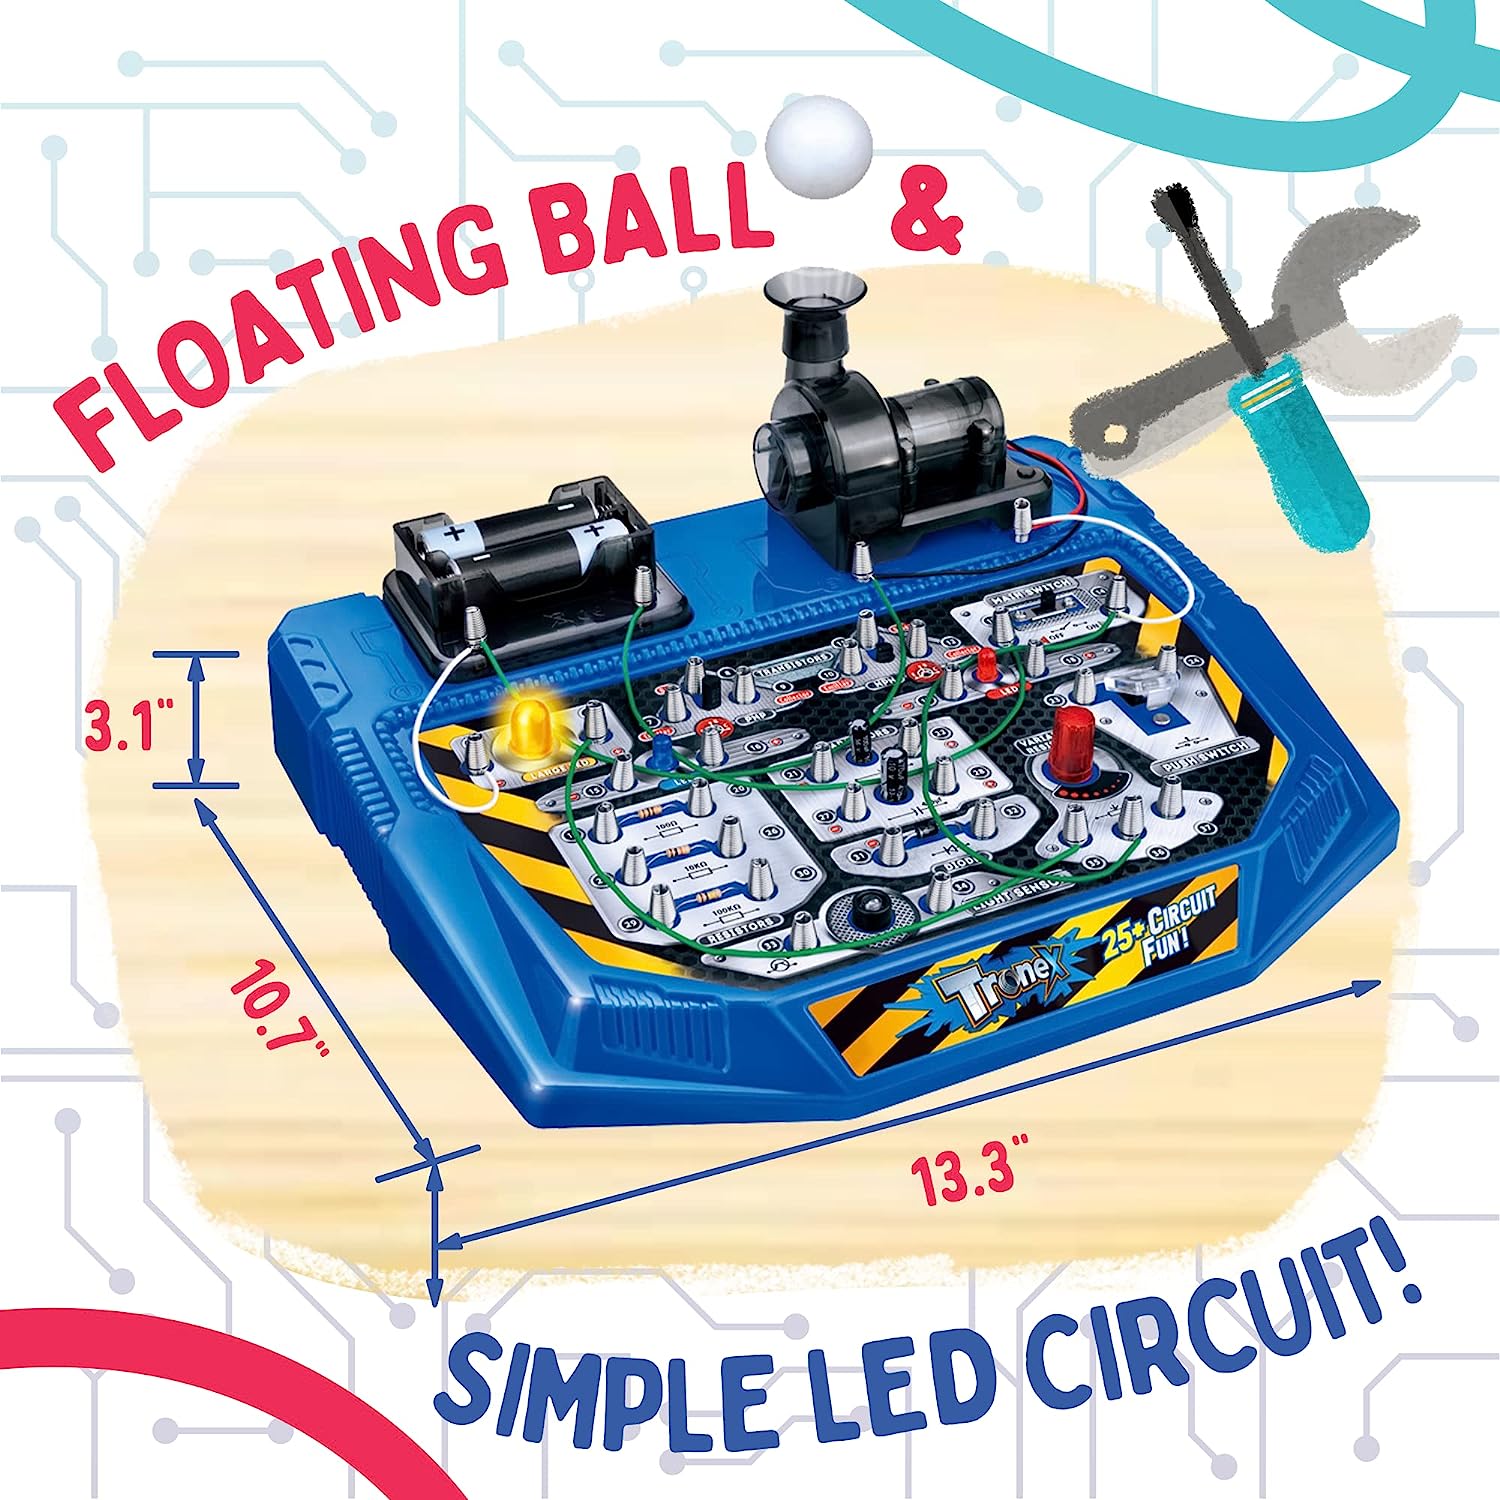 Playz Ridiculous Inventions Science Kits for Kids - Energy, Electricity &  Magnetic Experiments Set - Build Electric Circuits, Motors, Telegraphic